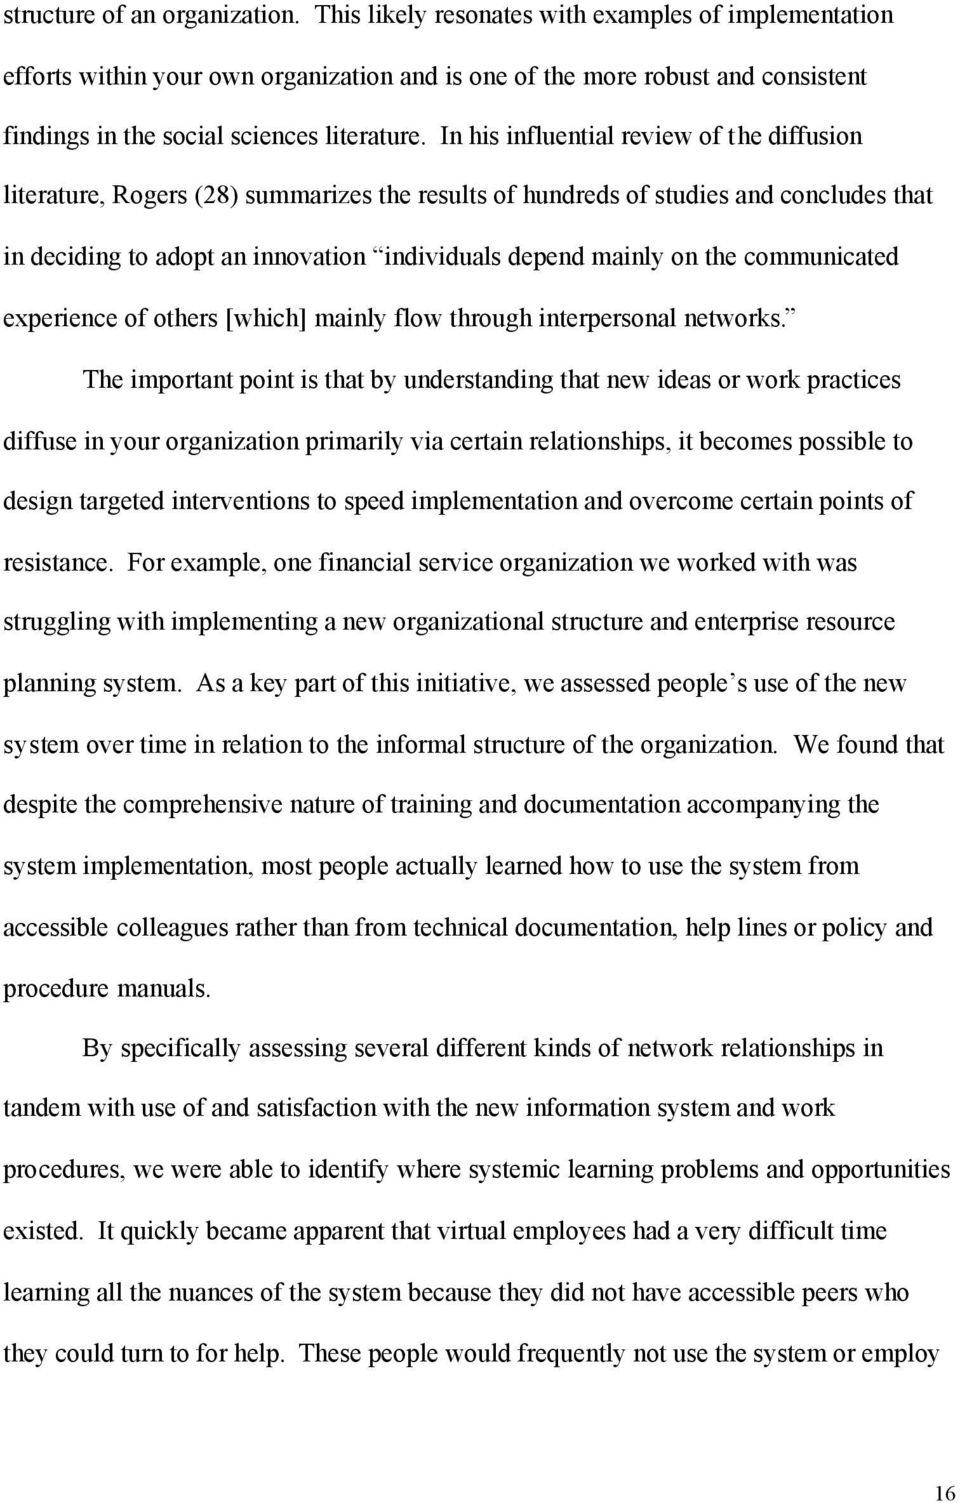 In his influential review of the diffusion literature, Rogers (28) summarizes the results of hundreds of studies and concludes that in deciding to adopt an innovation individuals depend mainly on the